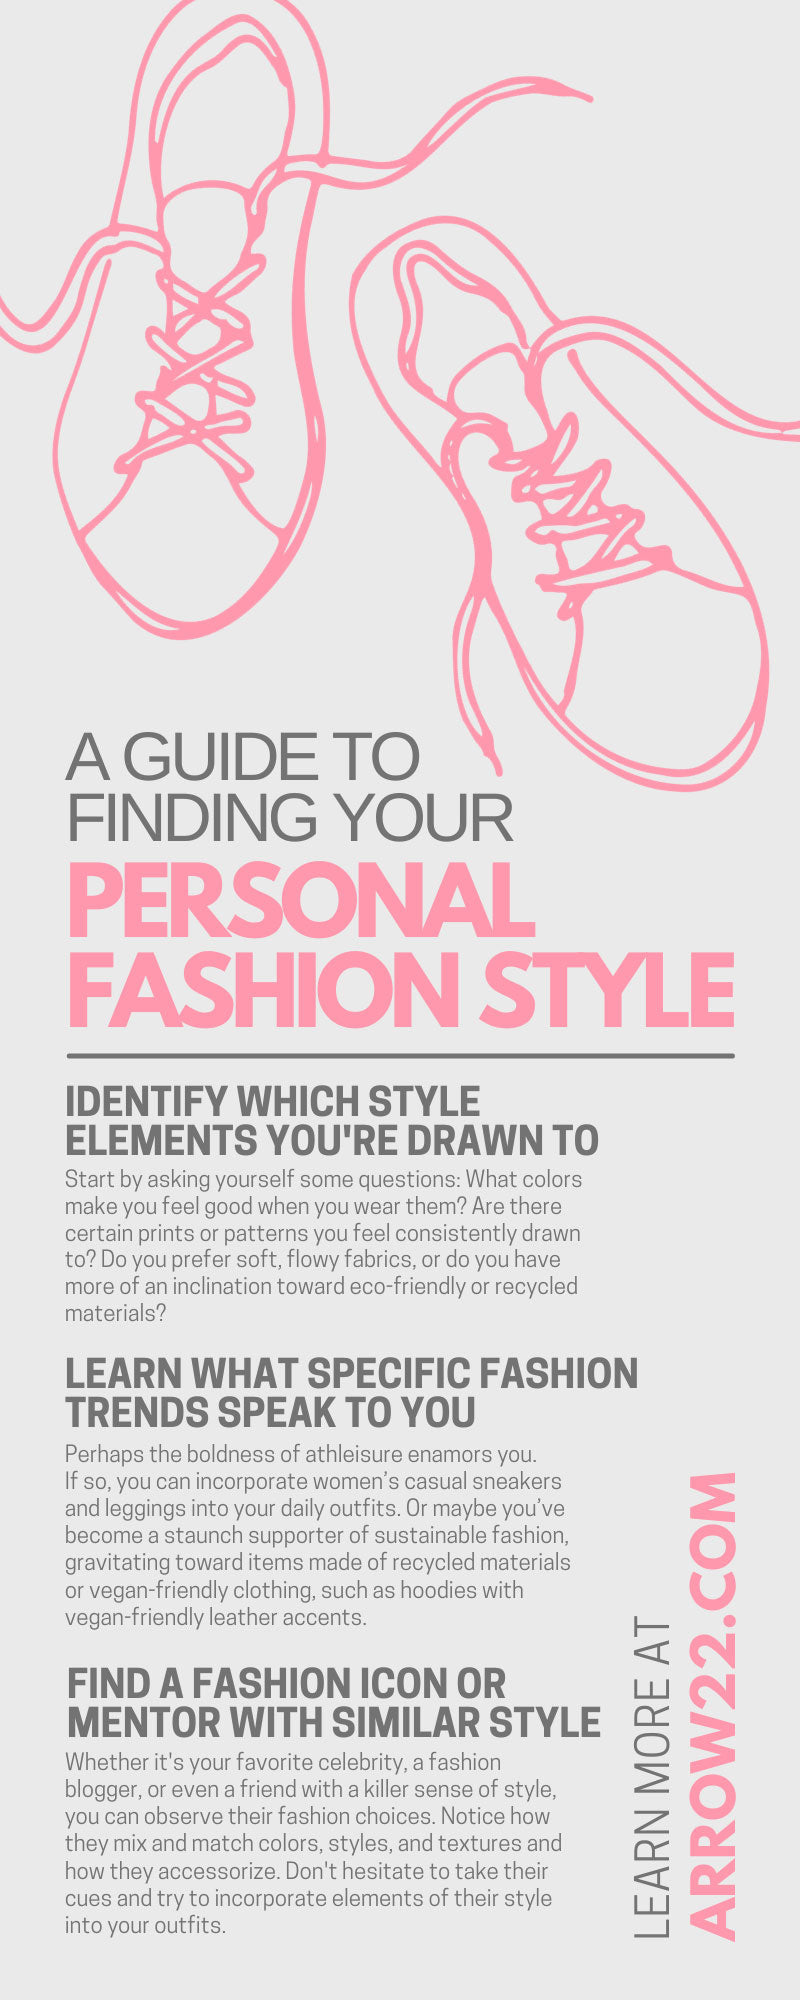 A Guide to Finding Your Personal Fashion Style